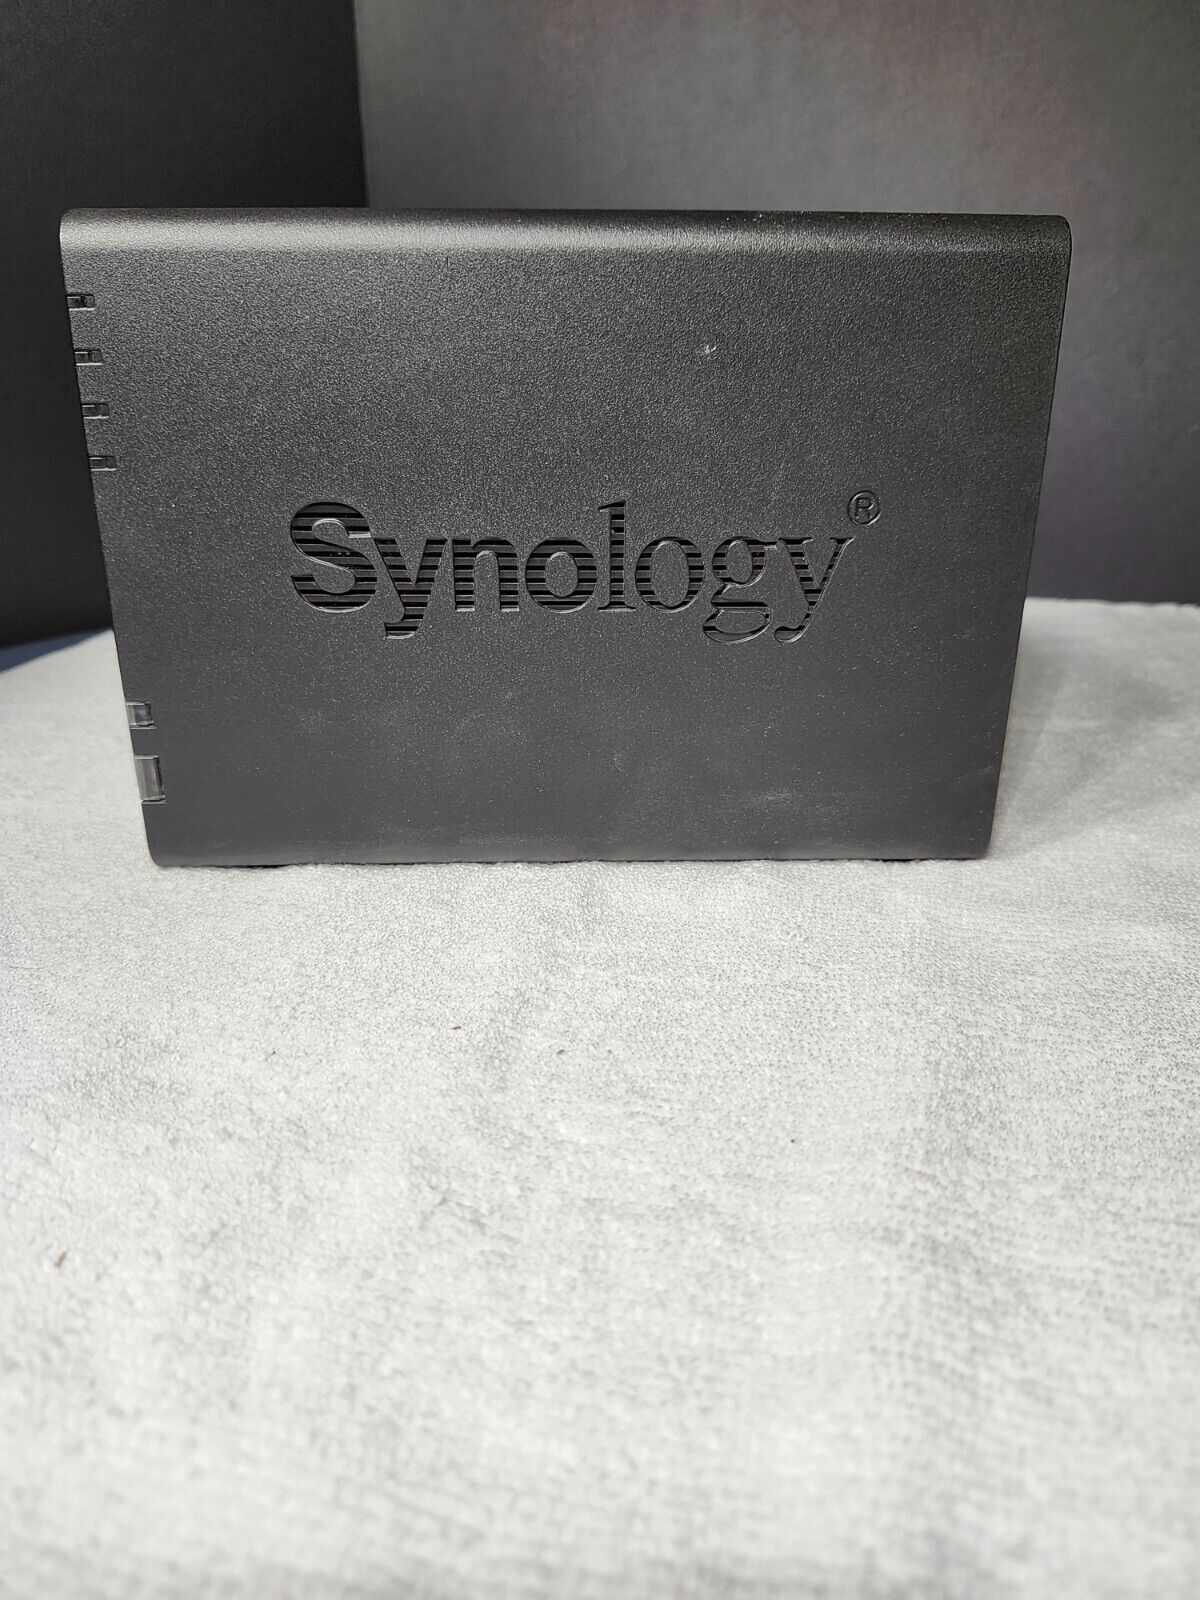 Synology DiskStation DS213 NAS Network Storage W/Discs- 2 Bays Clean & Tested